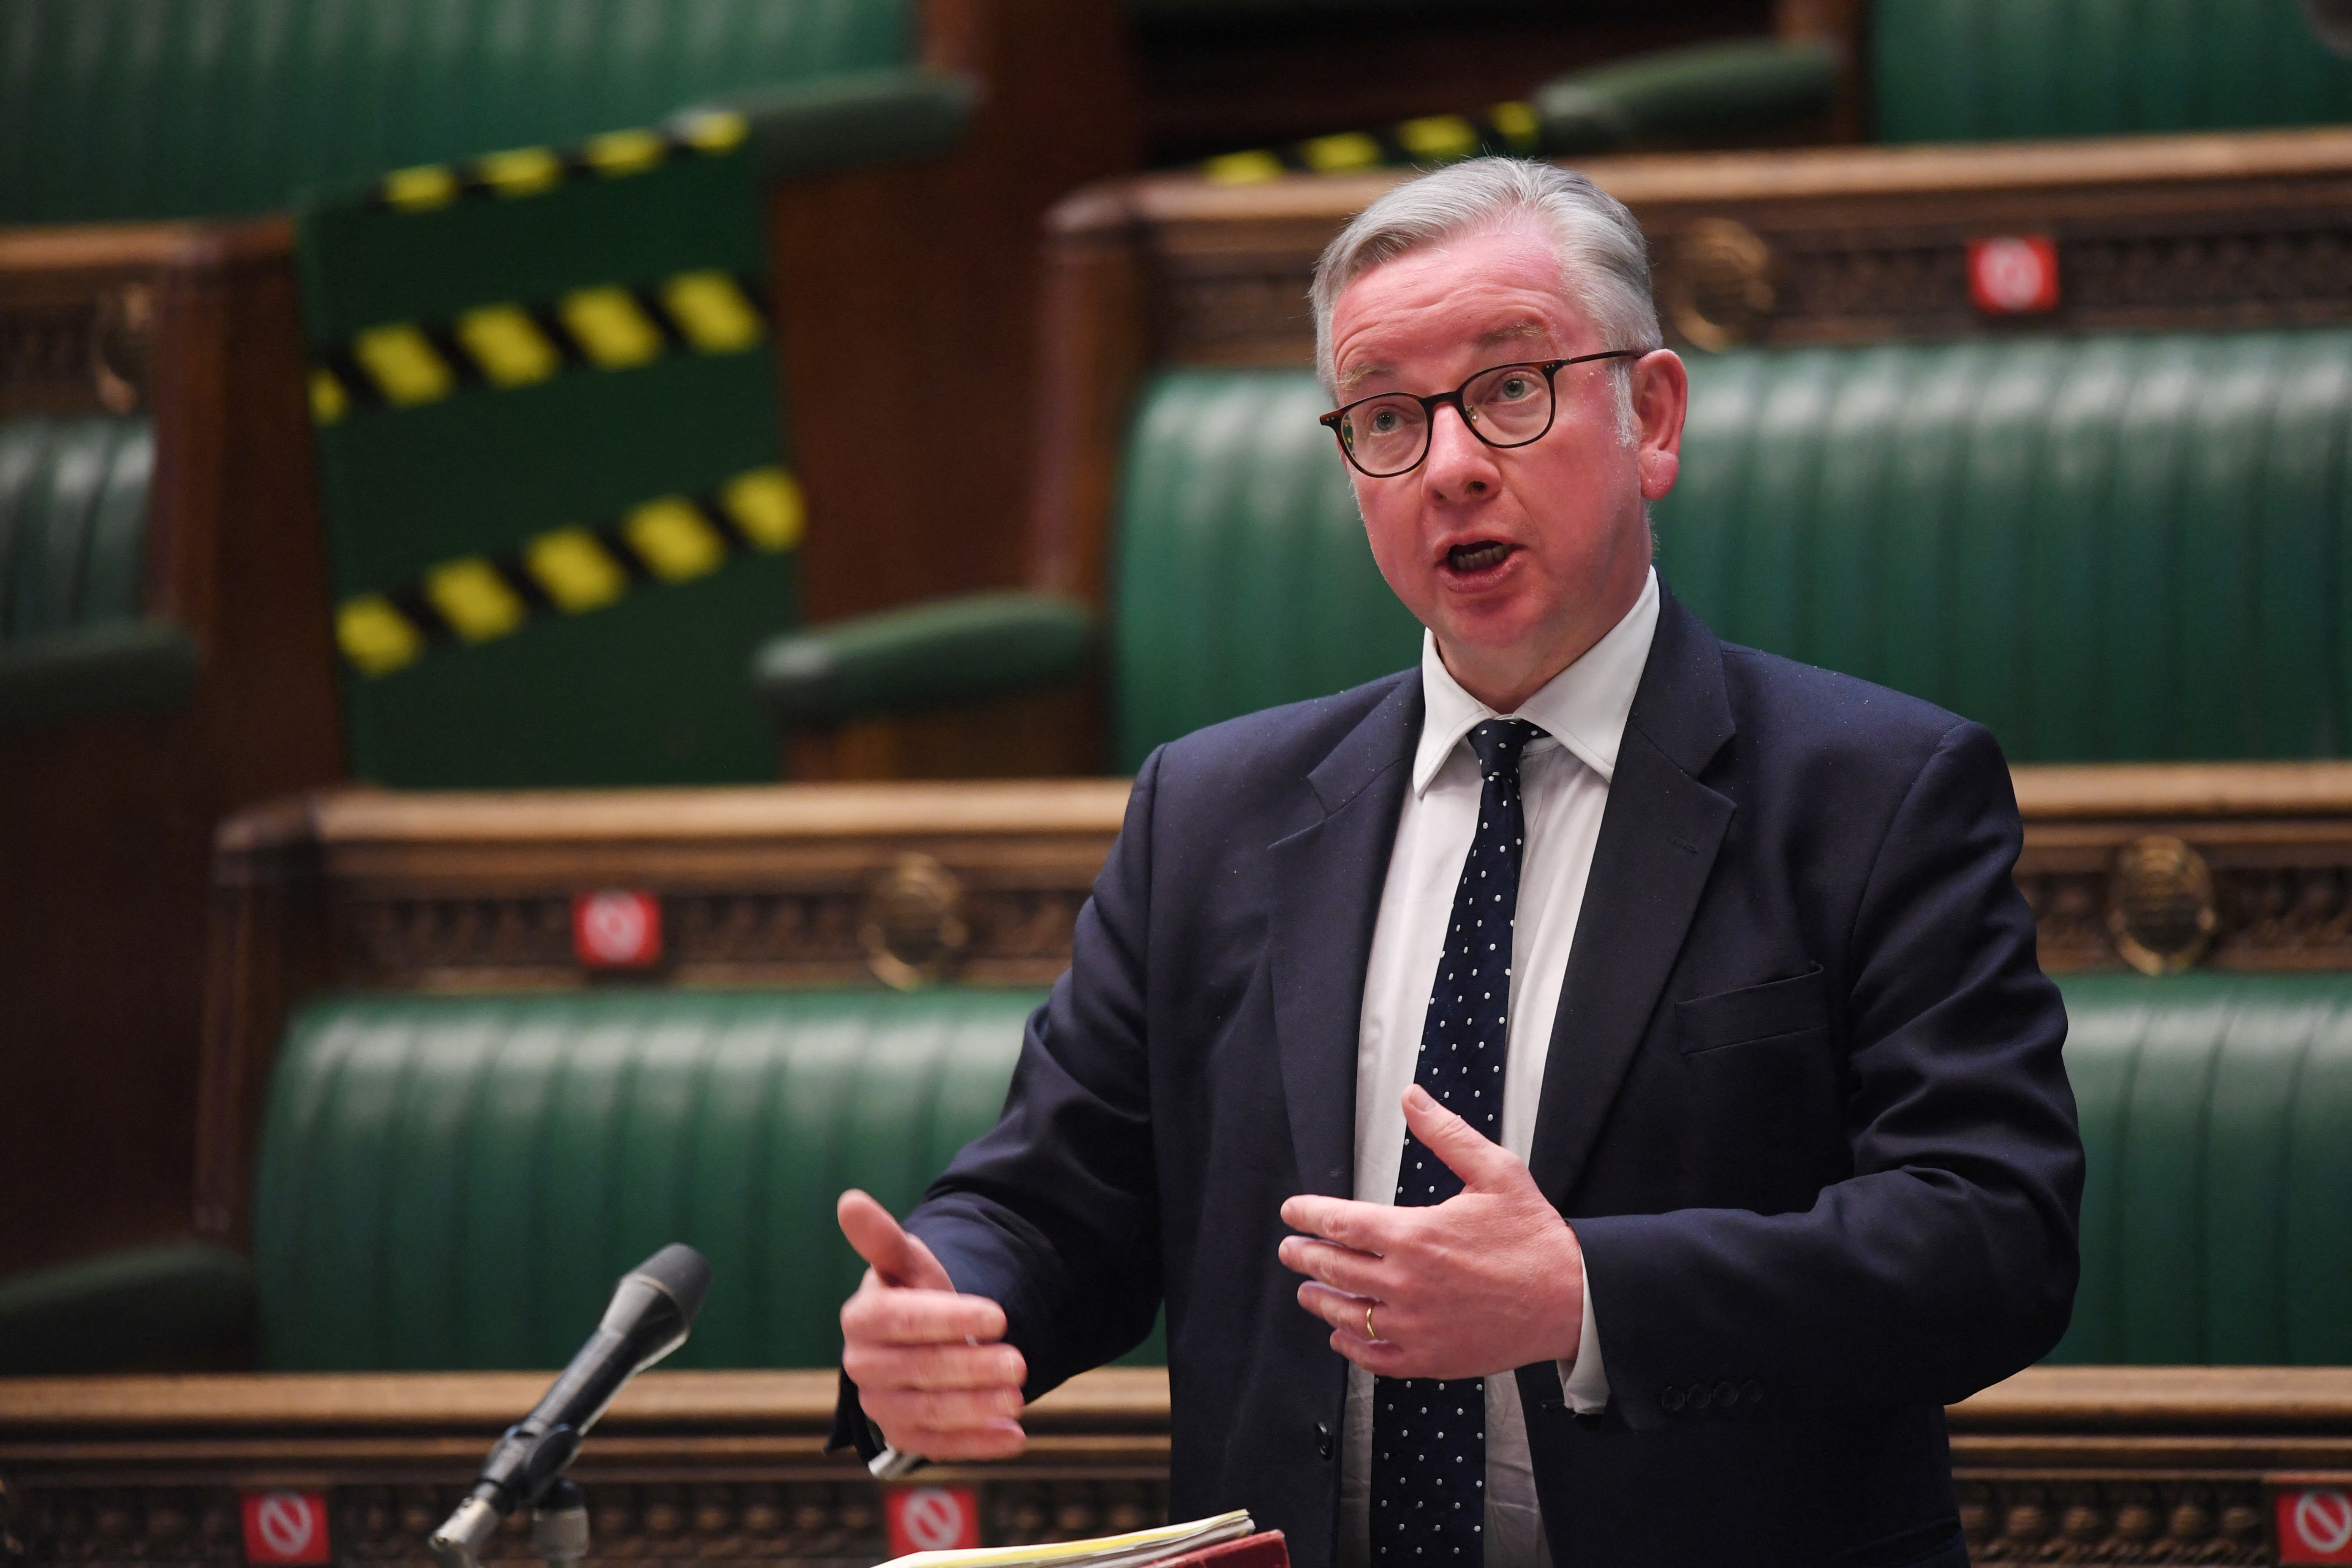 Michael Gove at the House of Commons in London